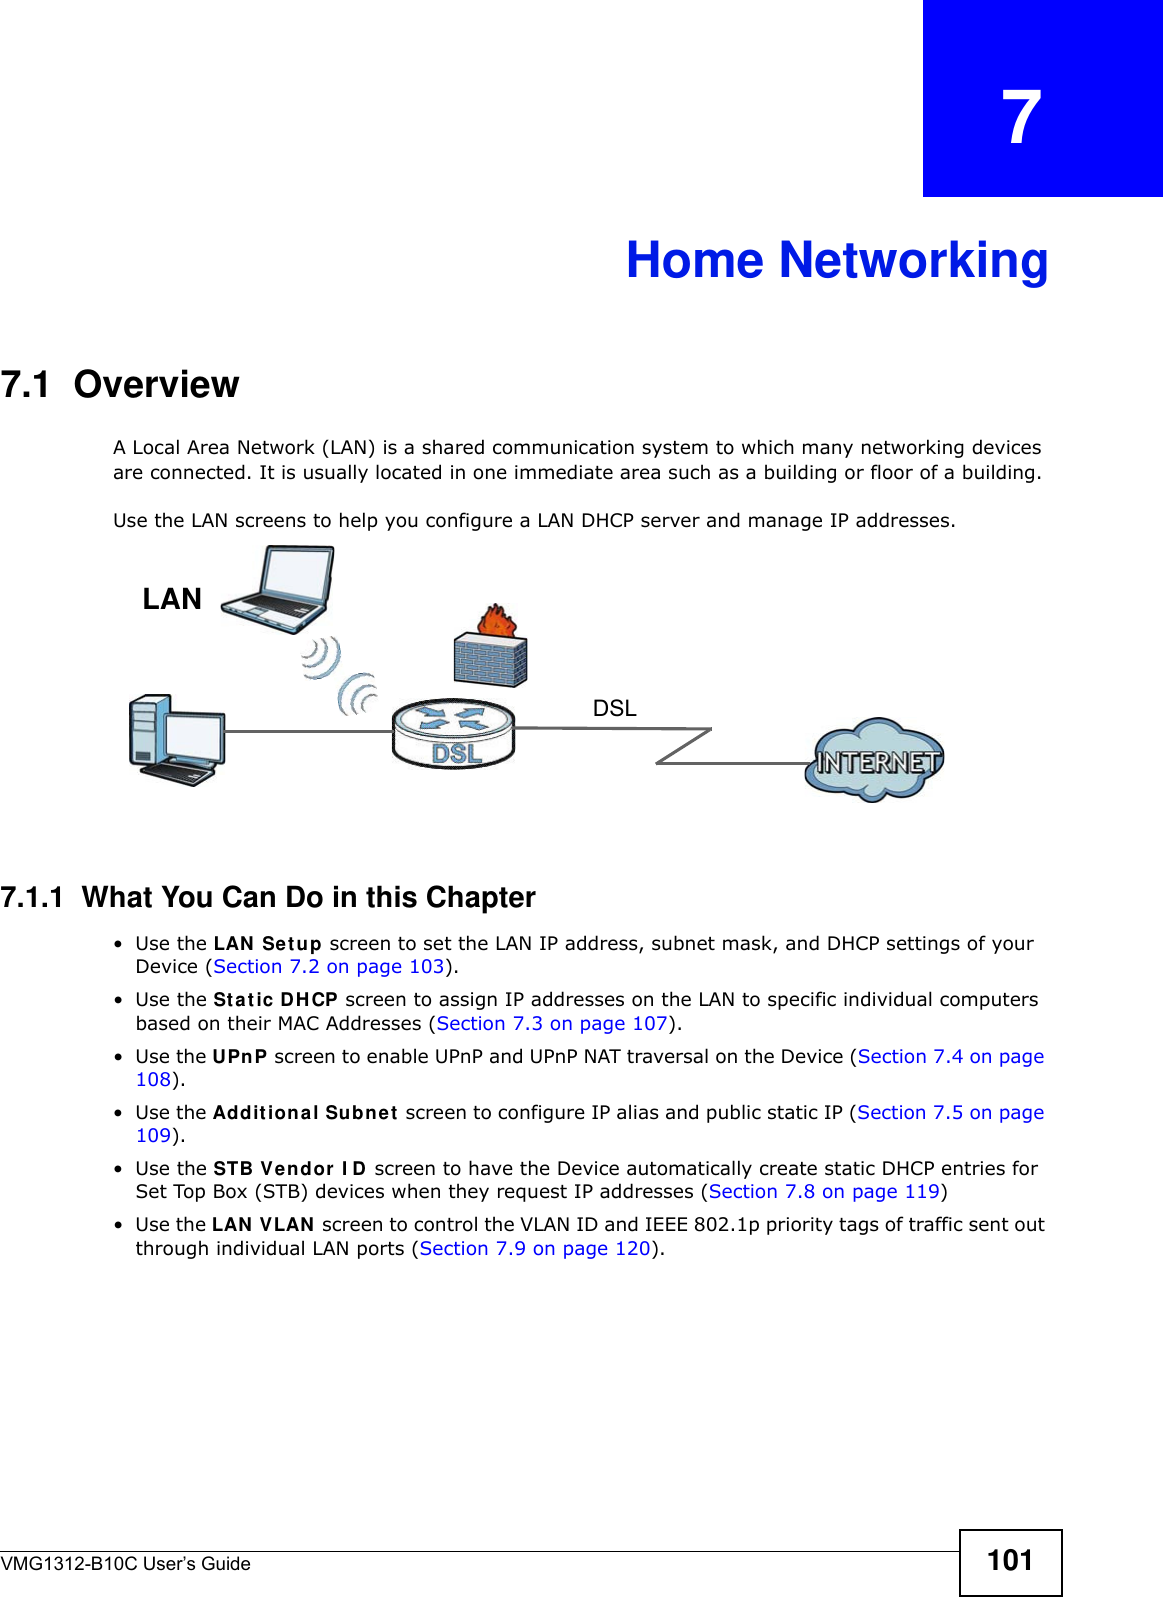 VMG1312-B10C User’s Guide 101CHAPTER   7Home Networking7.1  OverviewA Local Area Network (LAN) is a shared communication system to which many networking devices are connected. It is usually located in one immediate area such as a building or floor of a building.Use the LAN screens to help you configure a LAN DHCP server and manage IP addresses.7.1.1  What You Can Do in this Chapter•Use the LAN  Set up screen to set the LAN IP address, subnet mask, and DHCP settings of your Device (Section 7.2 on page 103).•Use the Stat ic DH CP screen to assign IP addresses on the LAN to specific individual computers based on their MAC Addresses (Section 7.3 on page 107). •Use the UPnP screen to enable UPnP and UPnP NAT traversal on the Device (Section 7.4 on page 108).•Use the Addit iona l Subnet  screen to configure IP alias and public static IP (Section 7.5 on page 109).•Use the STB Vendor  I D screen to have the Device automatically create static DHCP entries for Set Top Box (STB) devices when they request IP addresses (Section 7.8 on page 119)•Use the LAN  VLAN  screen to control the VLAN ID and IEEE 802.1p priority tags of traffic sent out through individual LAN ports (Section 7.9 on page 120).DSLLAN